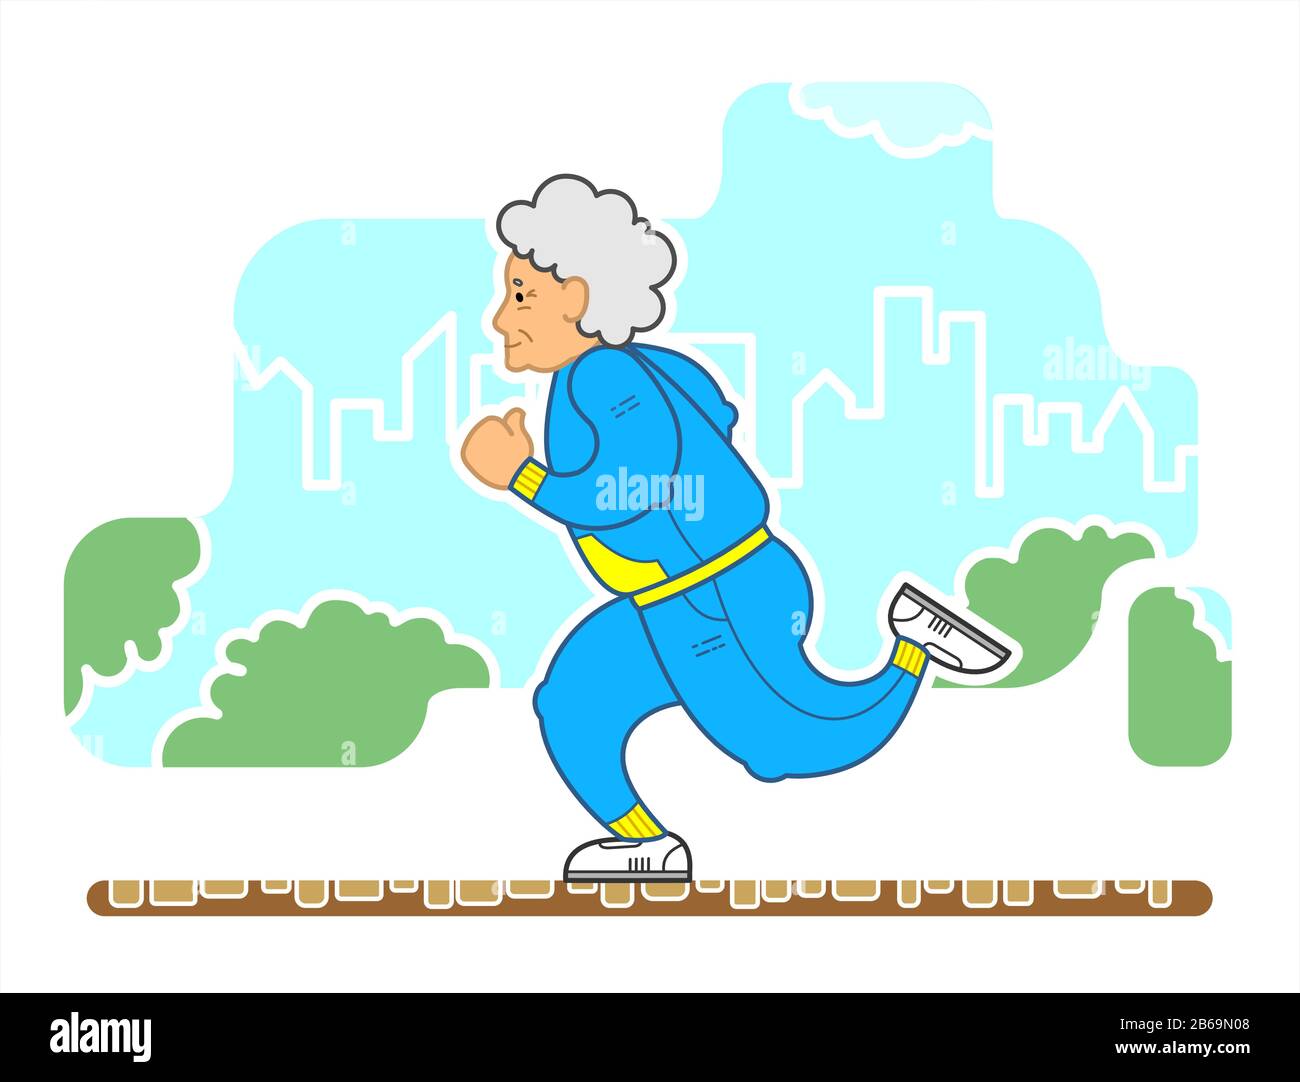 Vector Image Of A Running Old Woman In The Park. An Old Woman With Red Curly Hair, In A Tracksuit, In Sneakers. Elderly Woman, Senile People Concept. Stock Vector